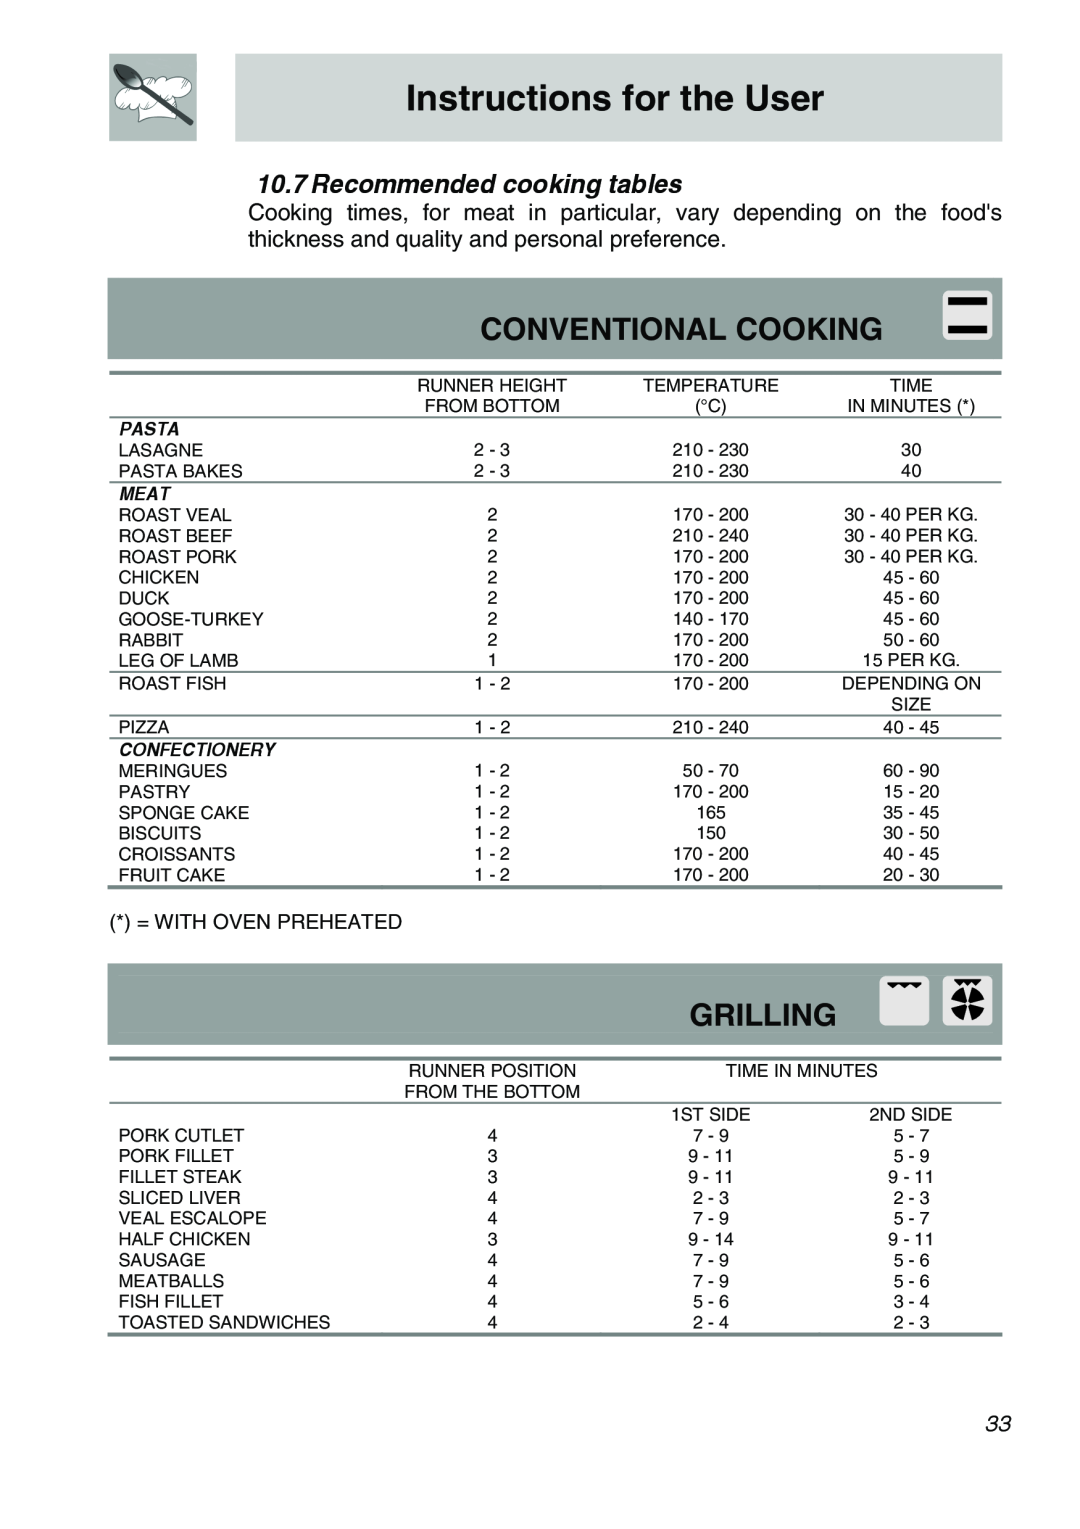 Smeg CSA150X-6 manual Conventional Cooking, Grilling, Recommended cooking tables, Instructions for the User, Pasta, Meat 